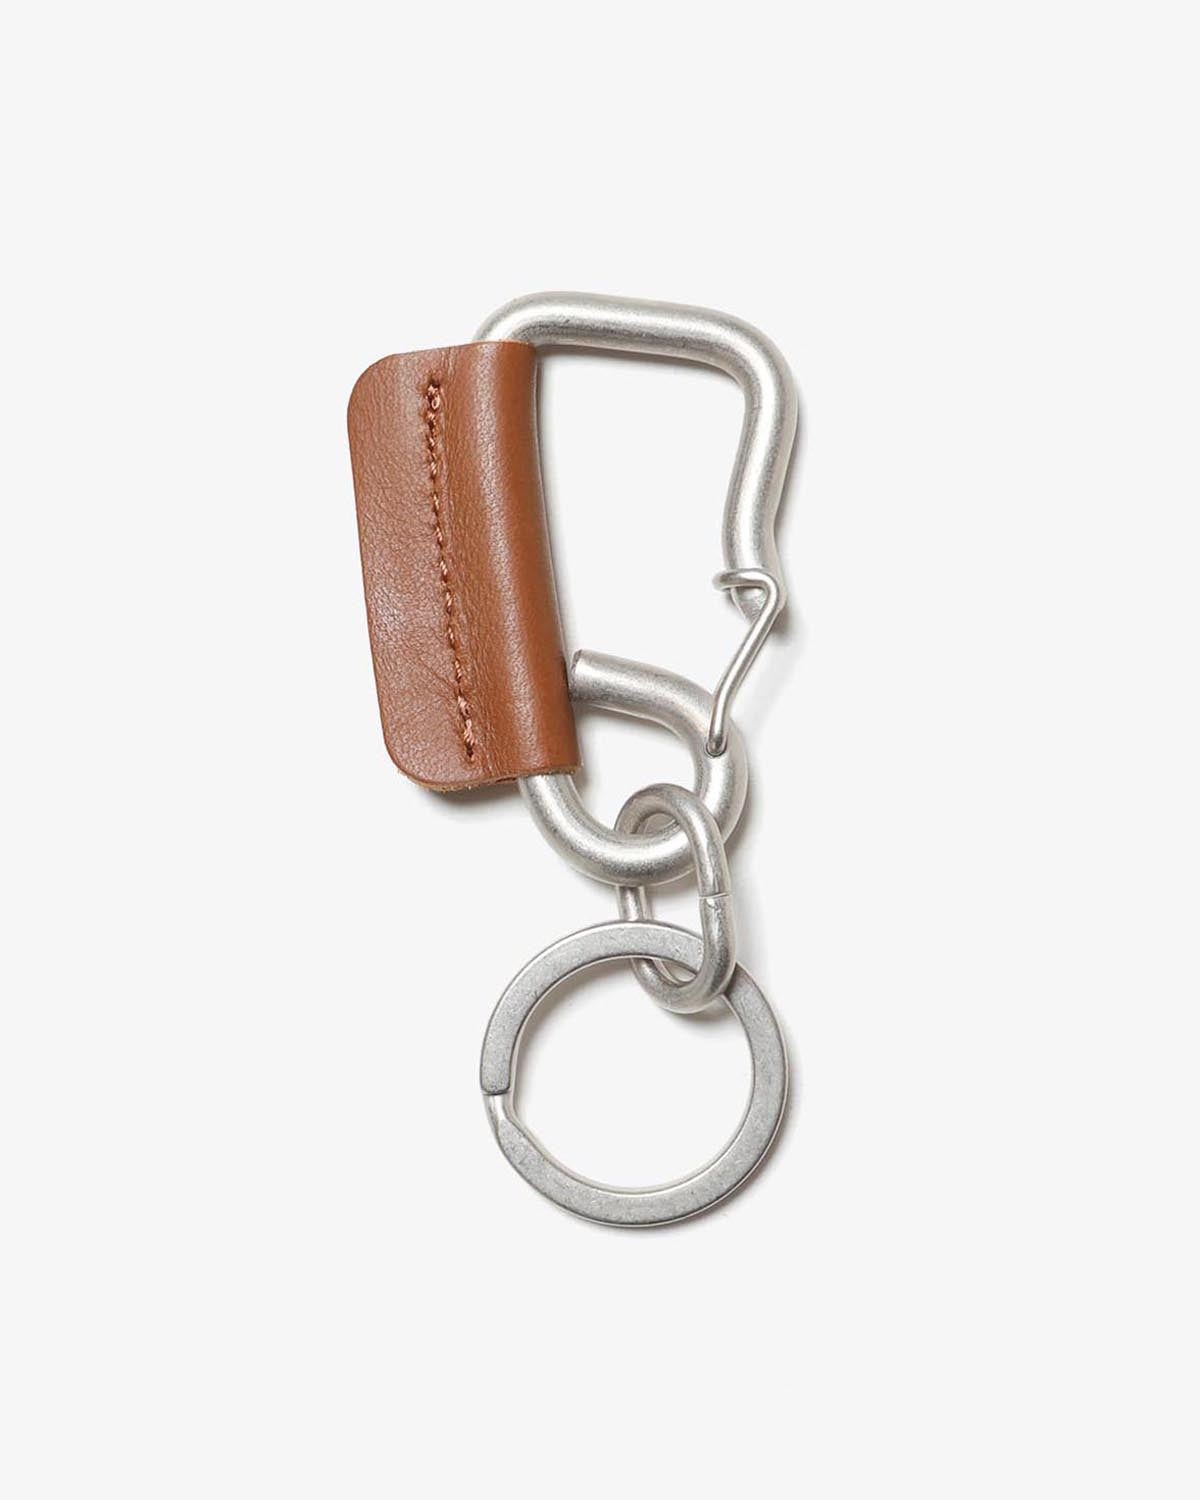 CARABINER KEY RING with COW LEATHER